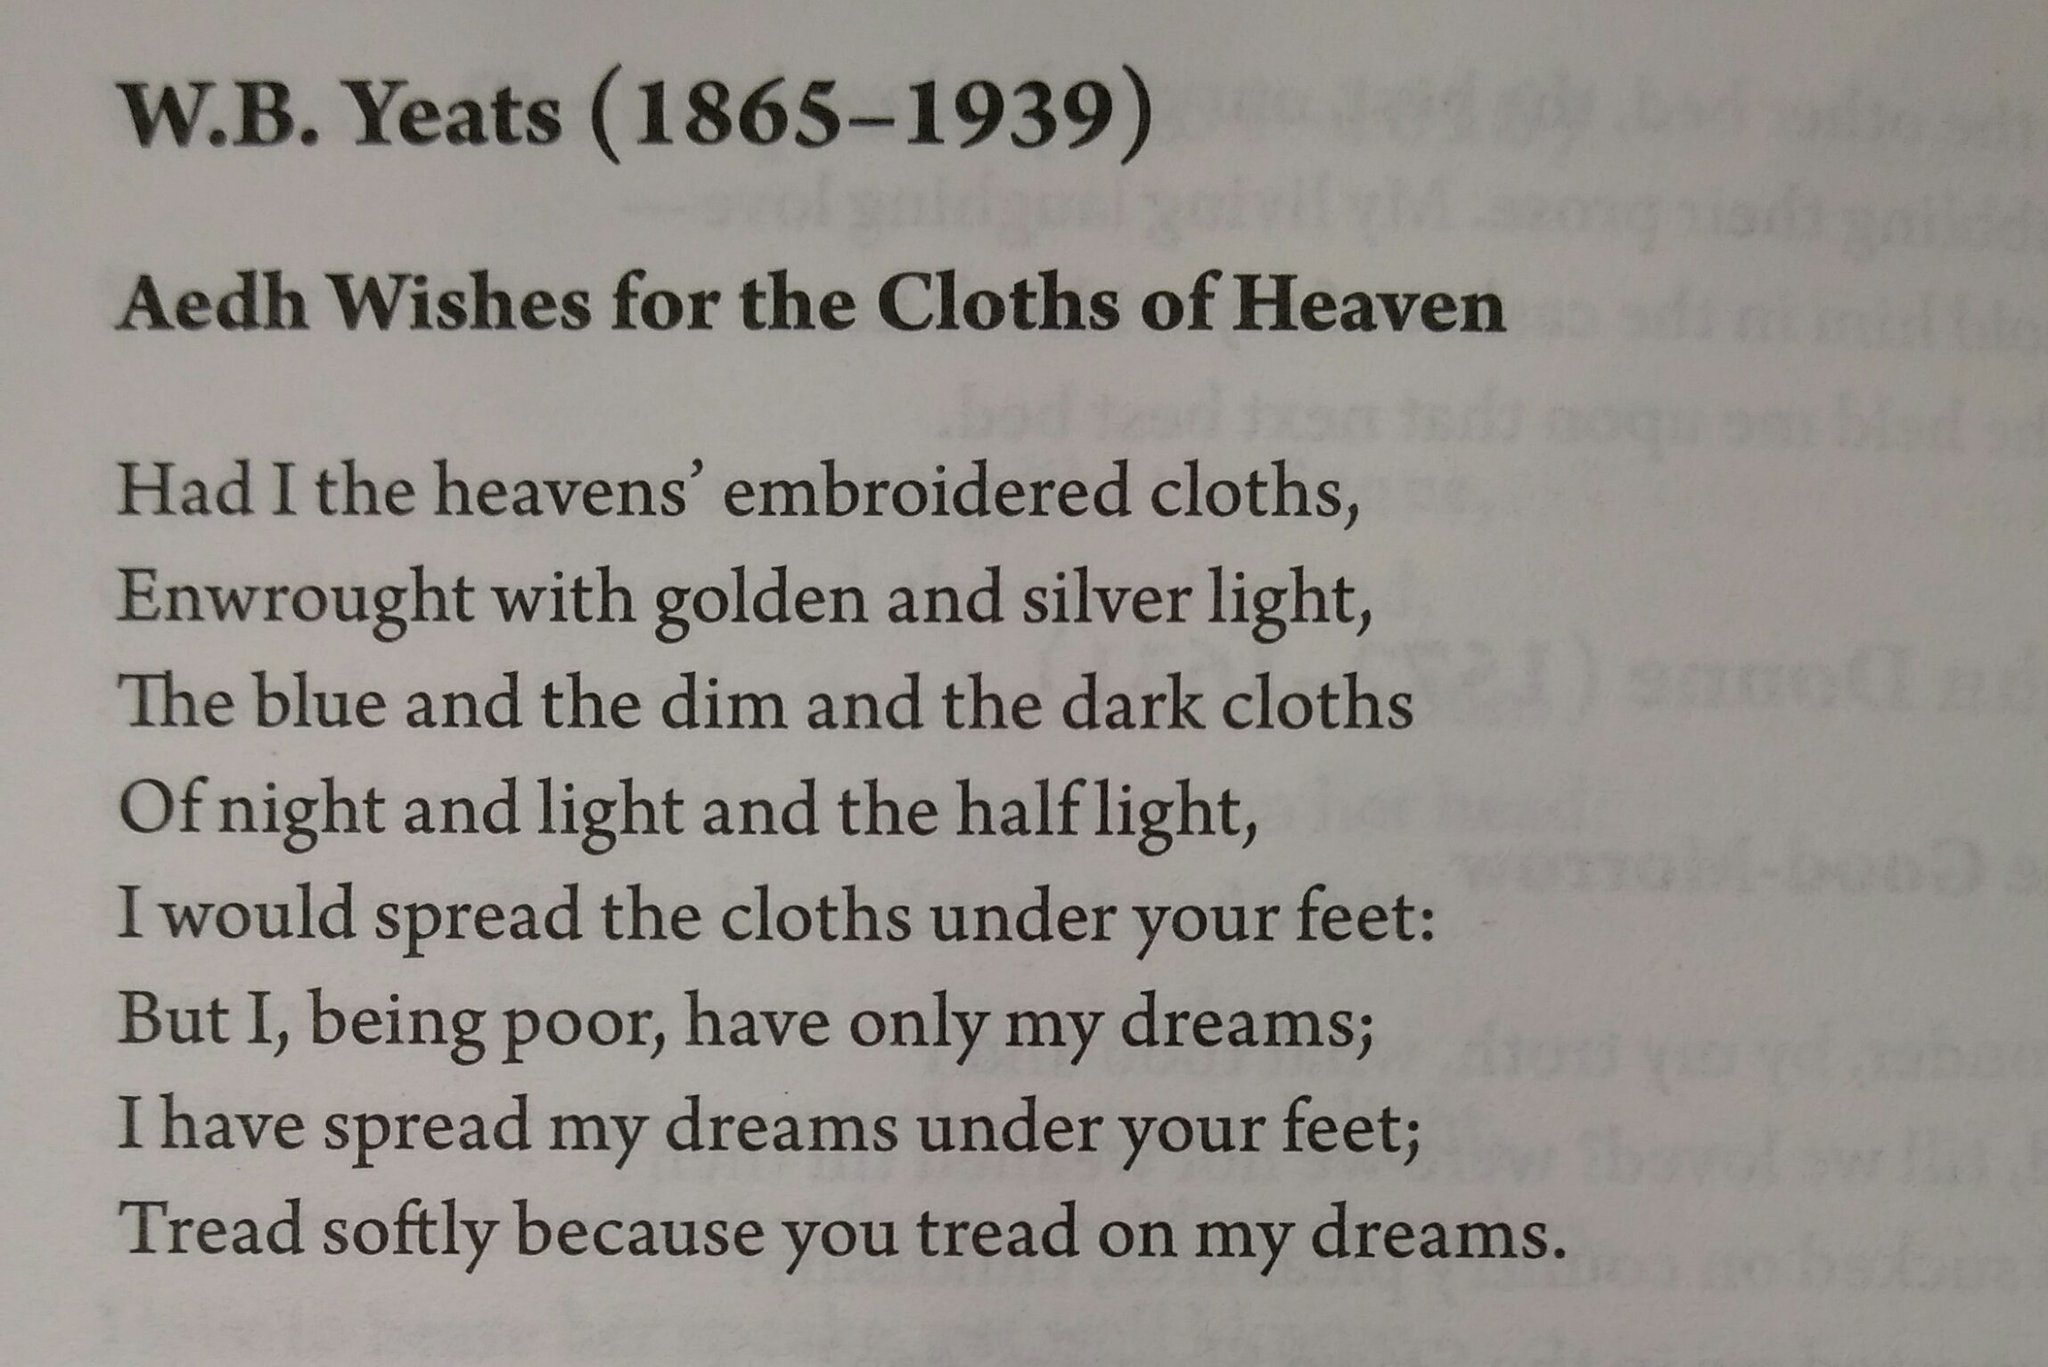 Ciarán Quinn on Twitter: ""I have spread my dreams under your feet Tread softly because you tread my dreams" Aedh wishes for the Cloths of Heaven - WB Yeats https://t.co/Tz7mqvbZLf" /